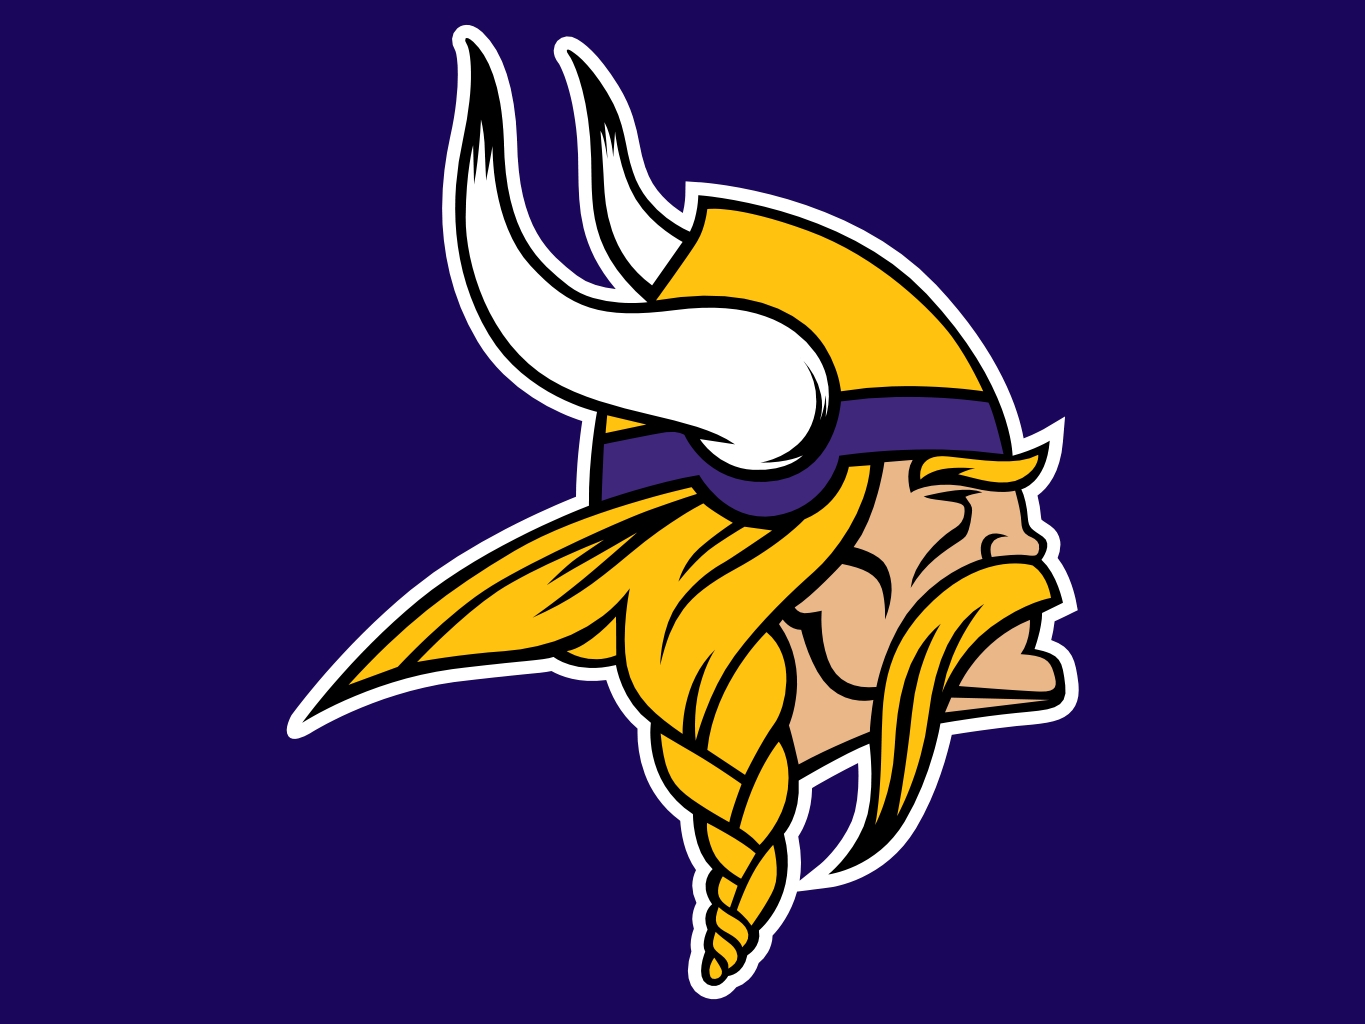 Image Of The Minnesota Vikings Logo By Collinsflags